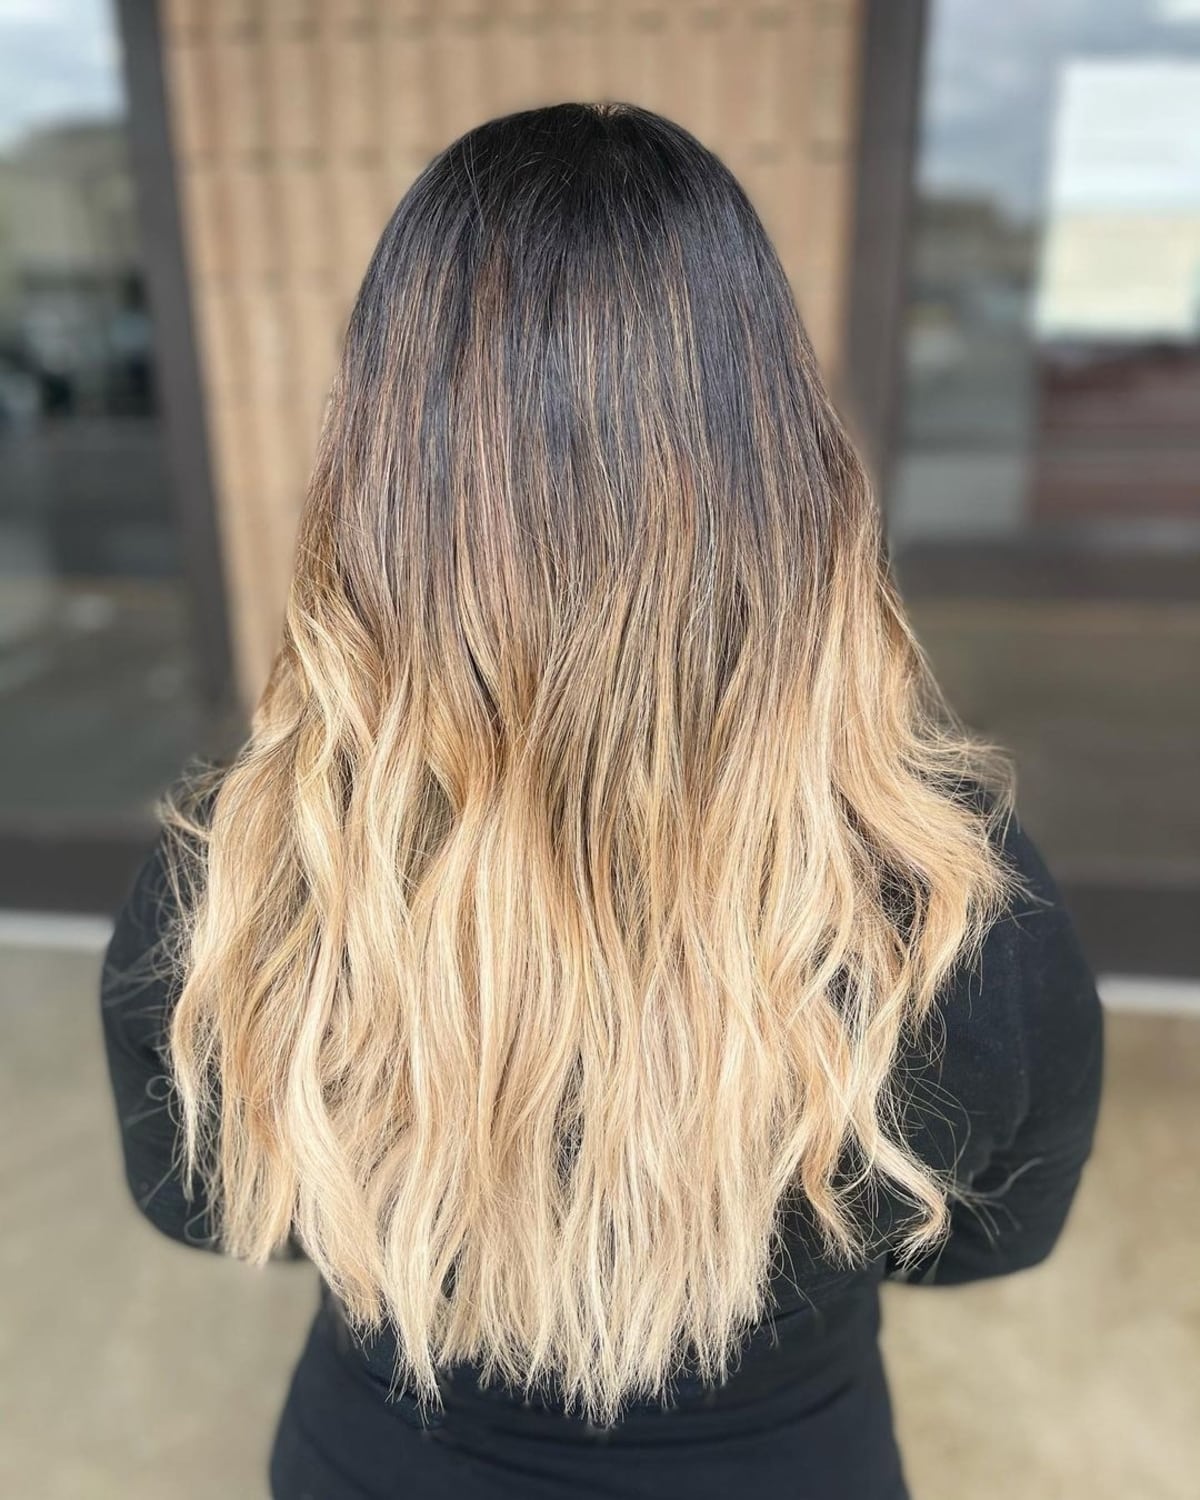 Bold brunette-to-blonde hair ombre